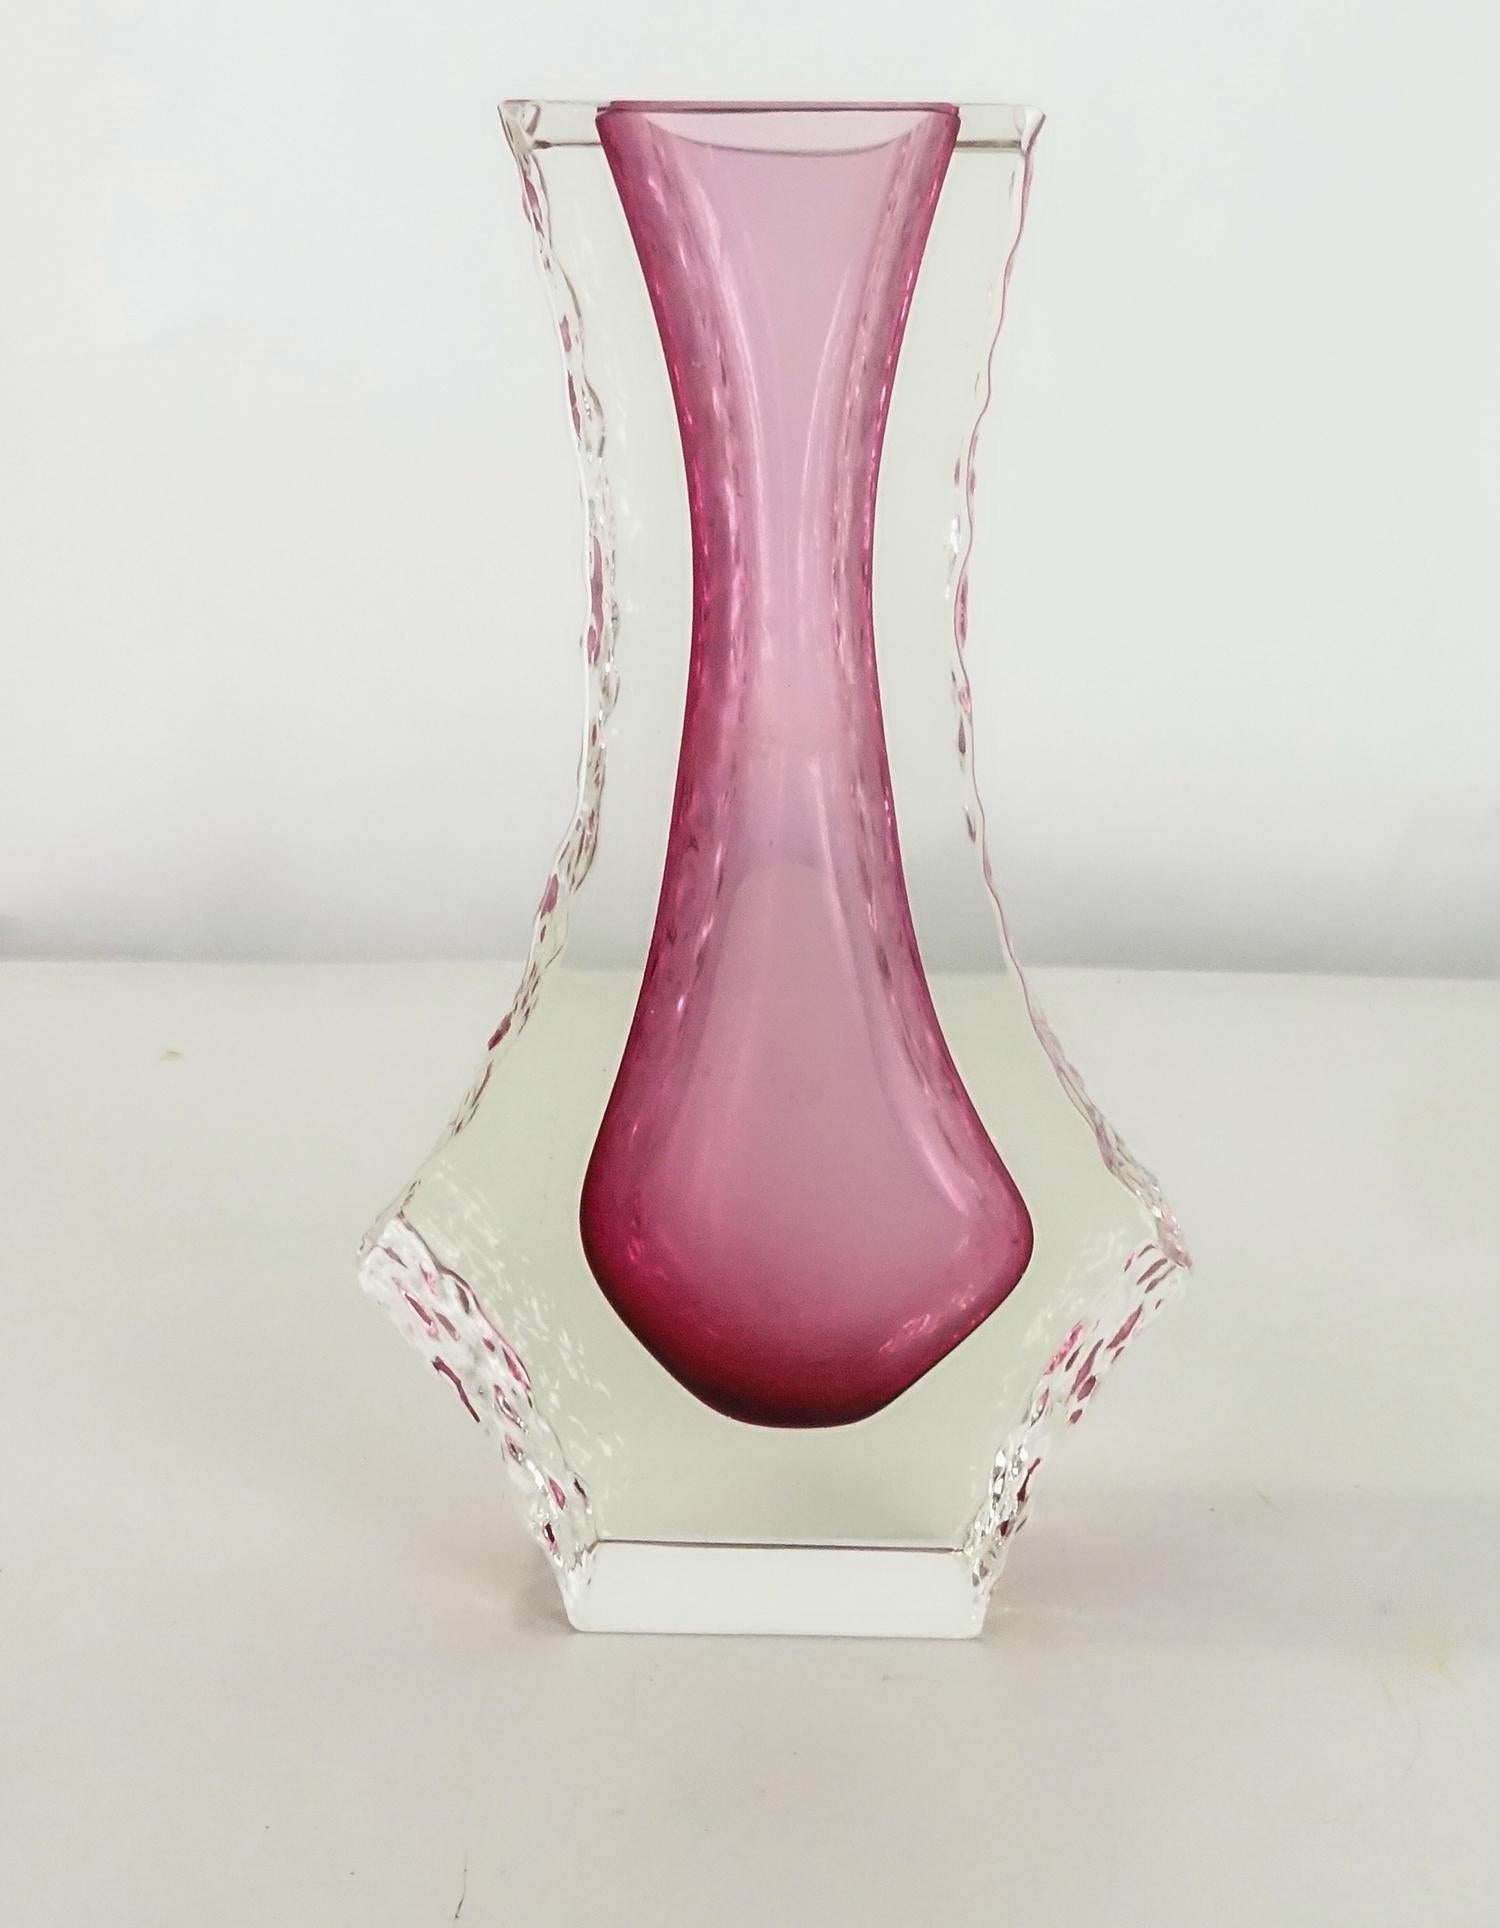 Midcentury Faceted Murano art glass vase with textured ice glass sides. Attributed to Mandruzzato, Italy, 1960s.
These textured vases are hard to find.
The color is not uniform, in some parts it is stronger than in others.
This Murano vase features